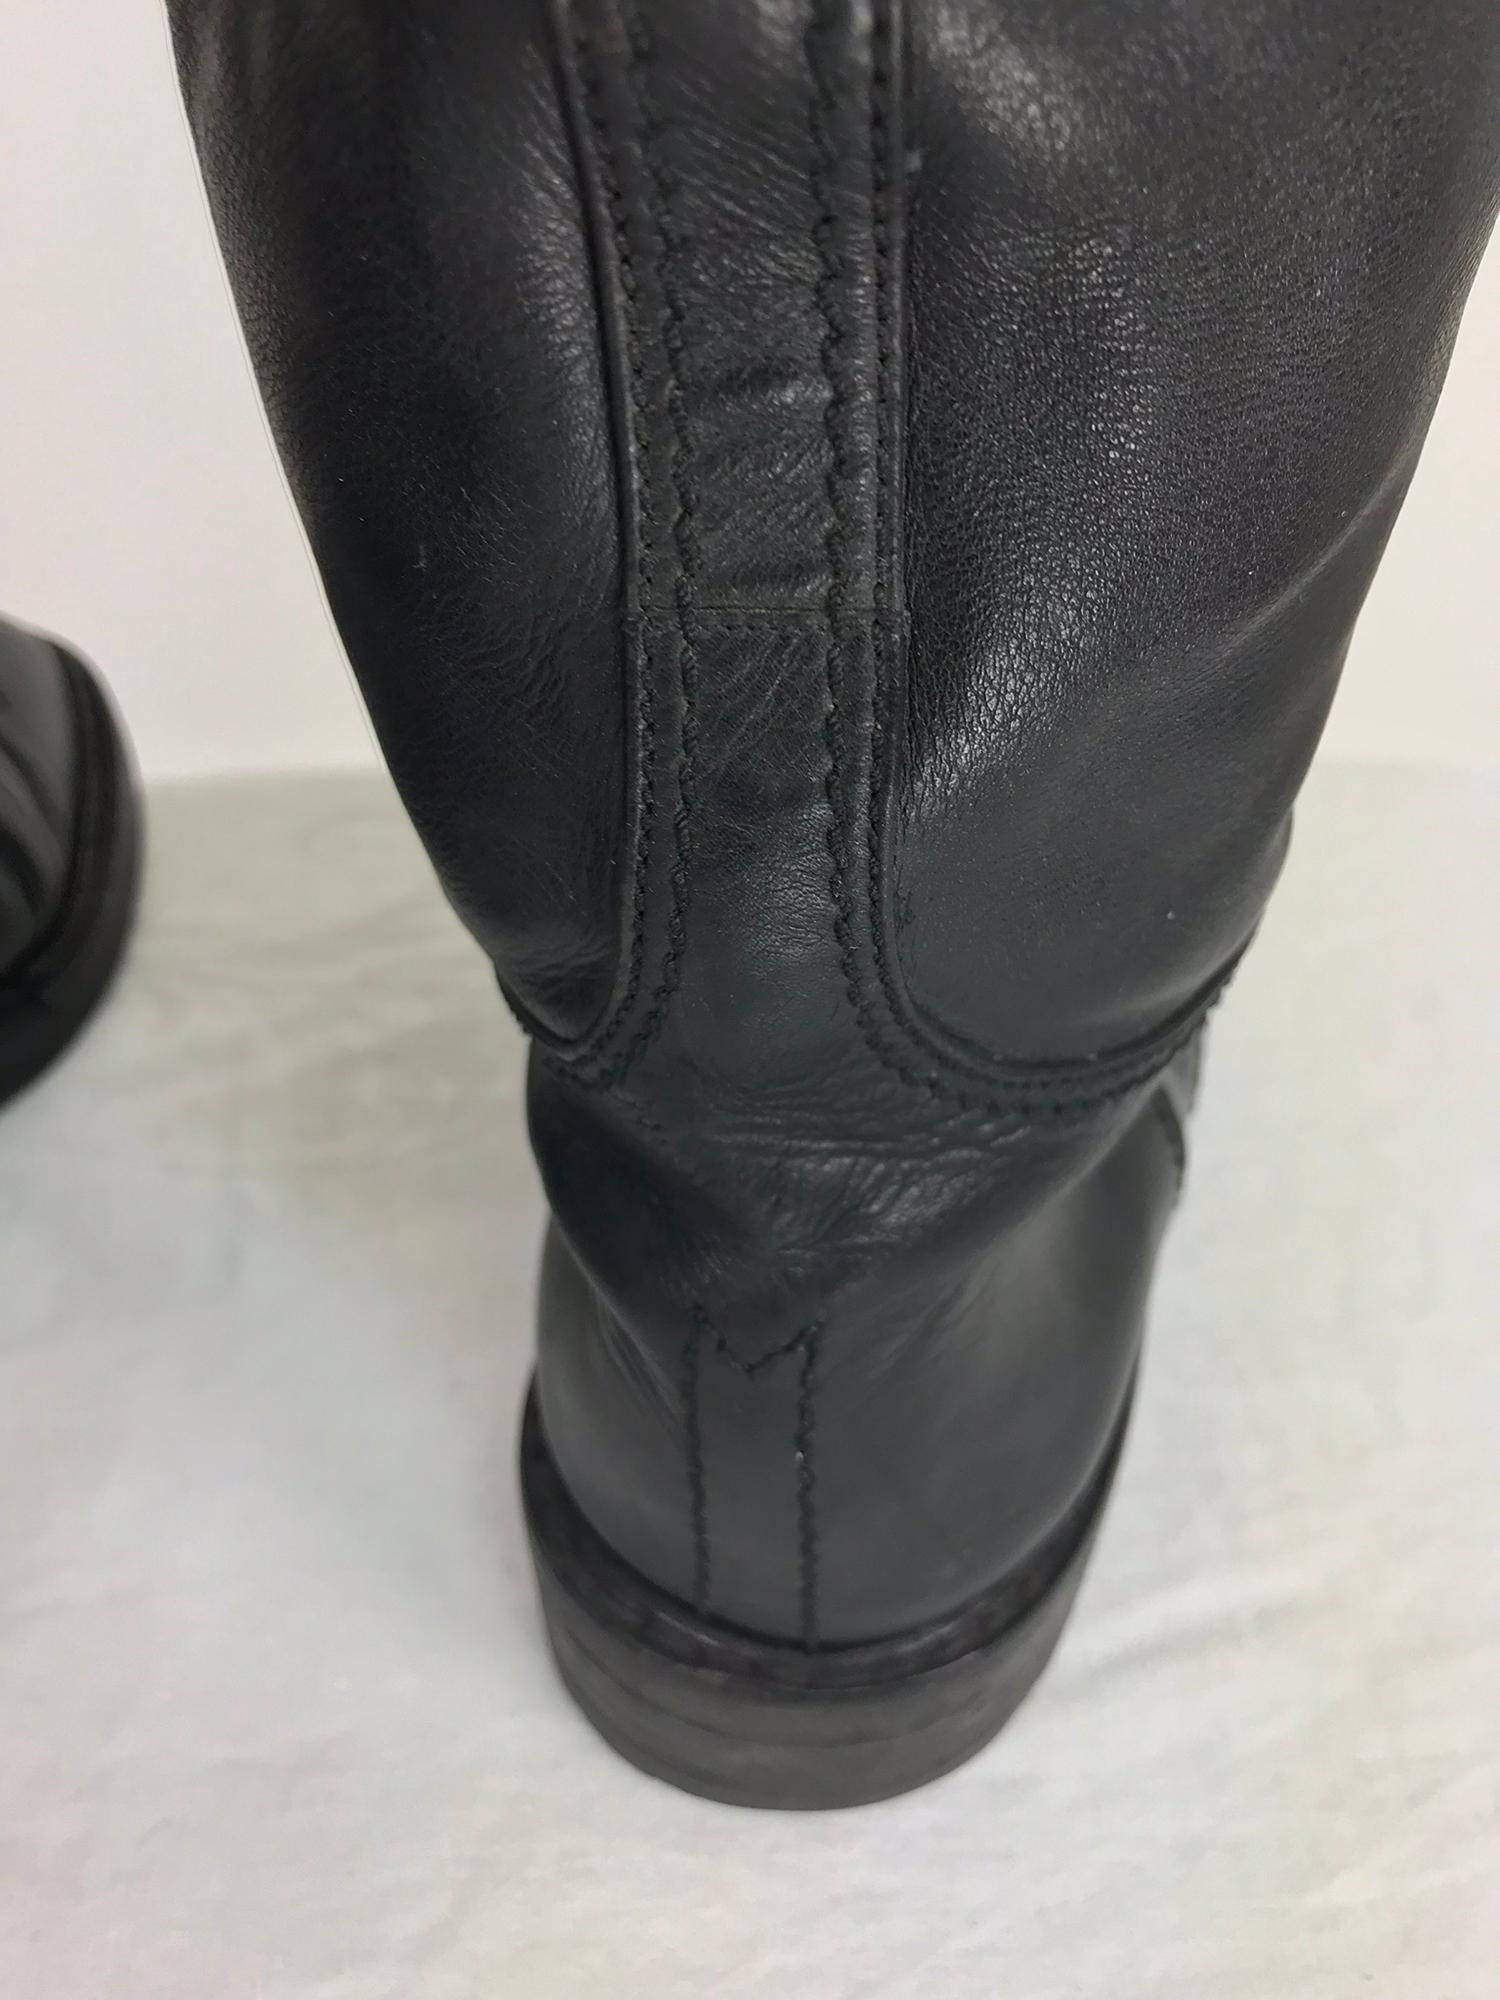 Chanel Over the knee black leather riding boots Claudia Schiffer worn 1990s 1